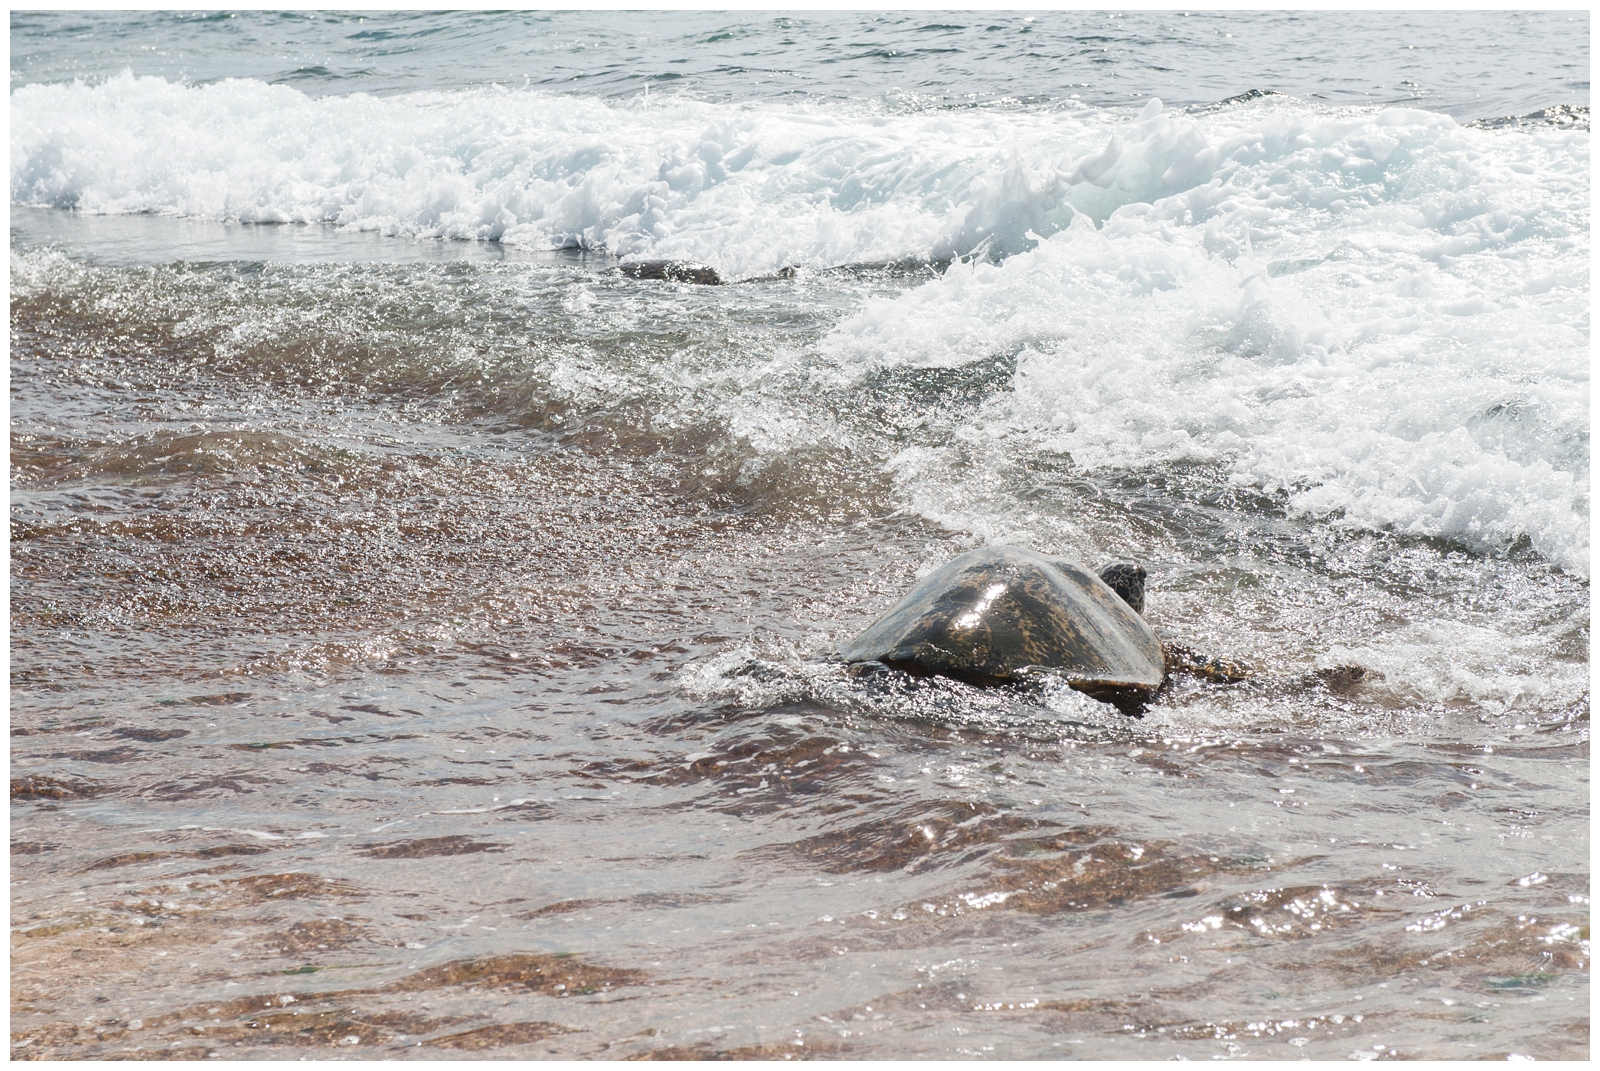 turtle on shoreline at The North Shore - Sunset Beach - Turtle Bay